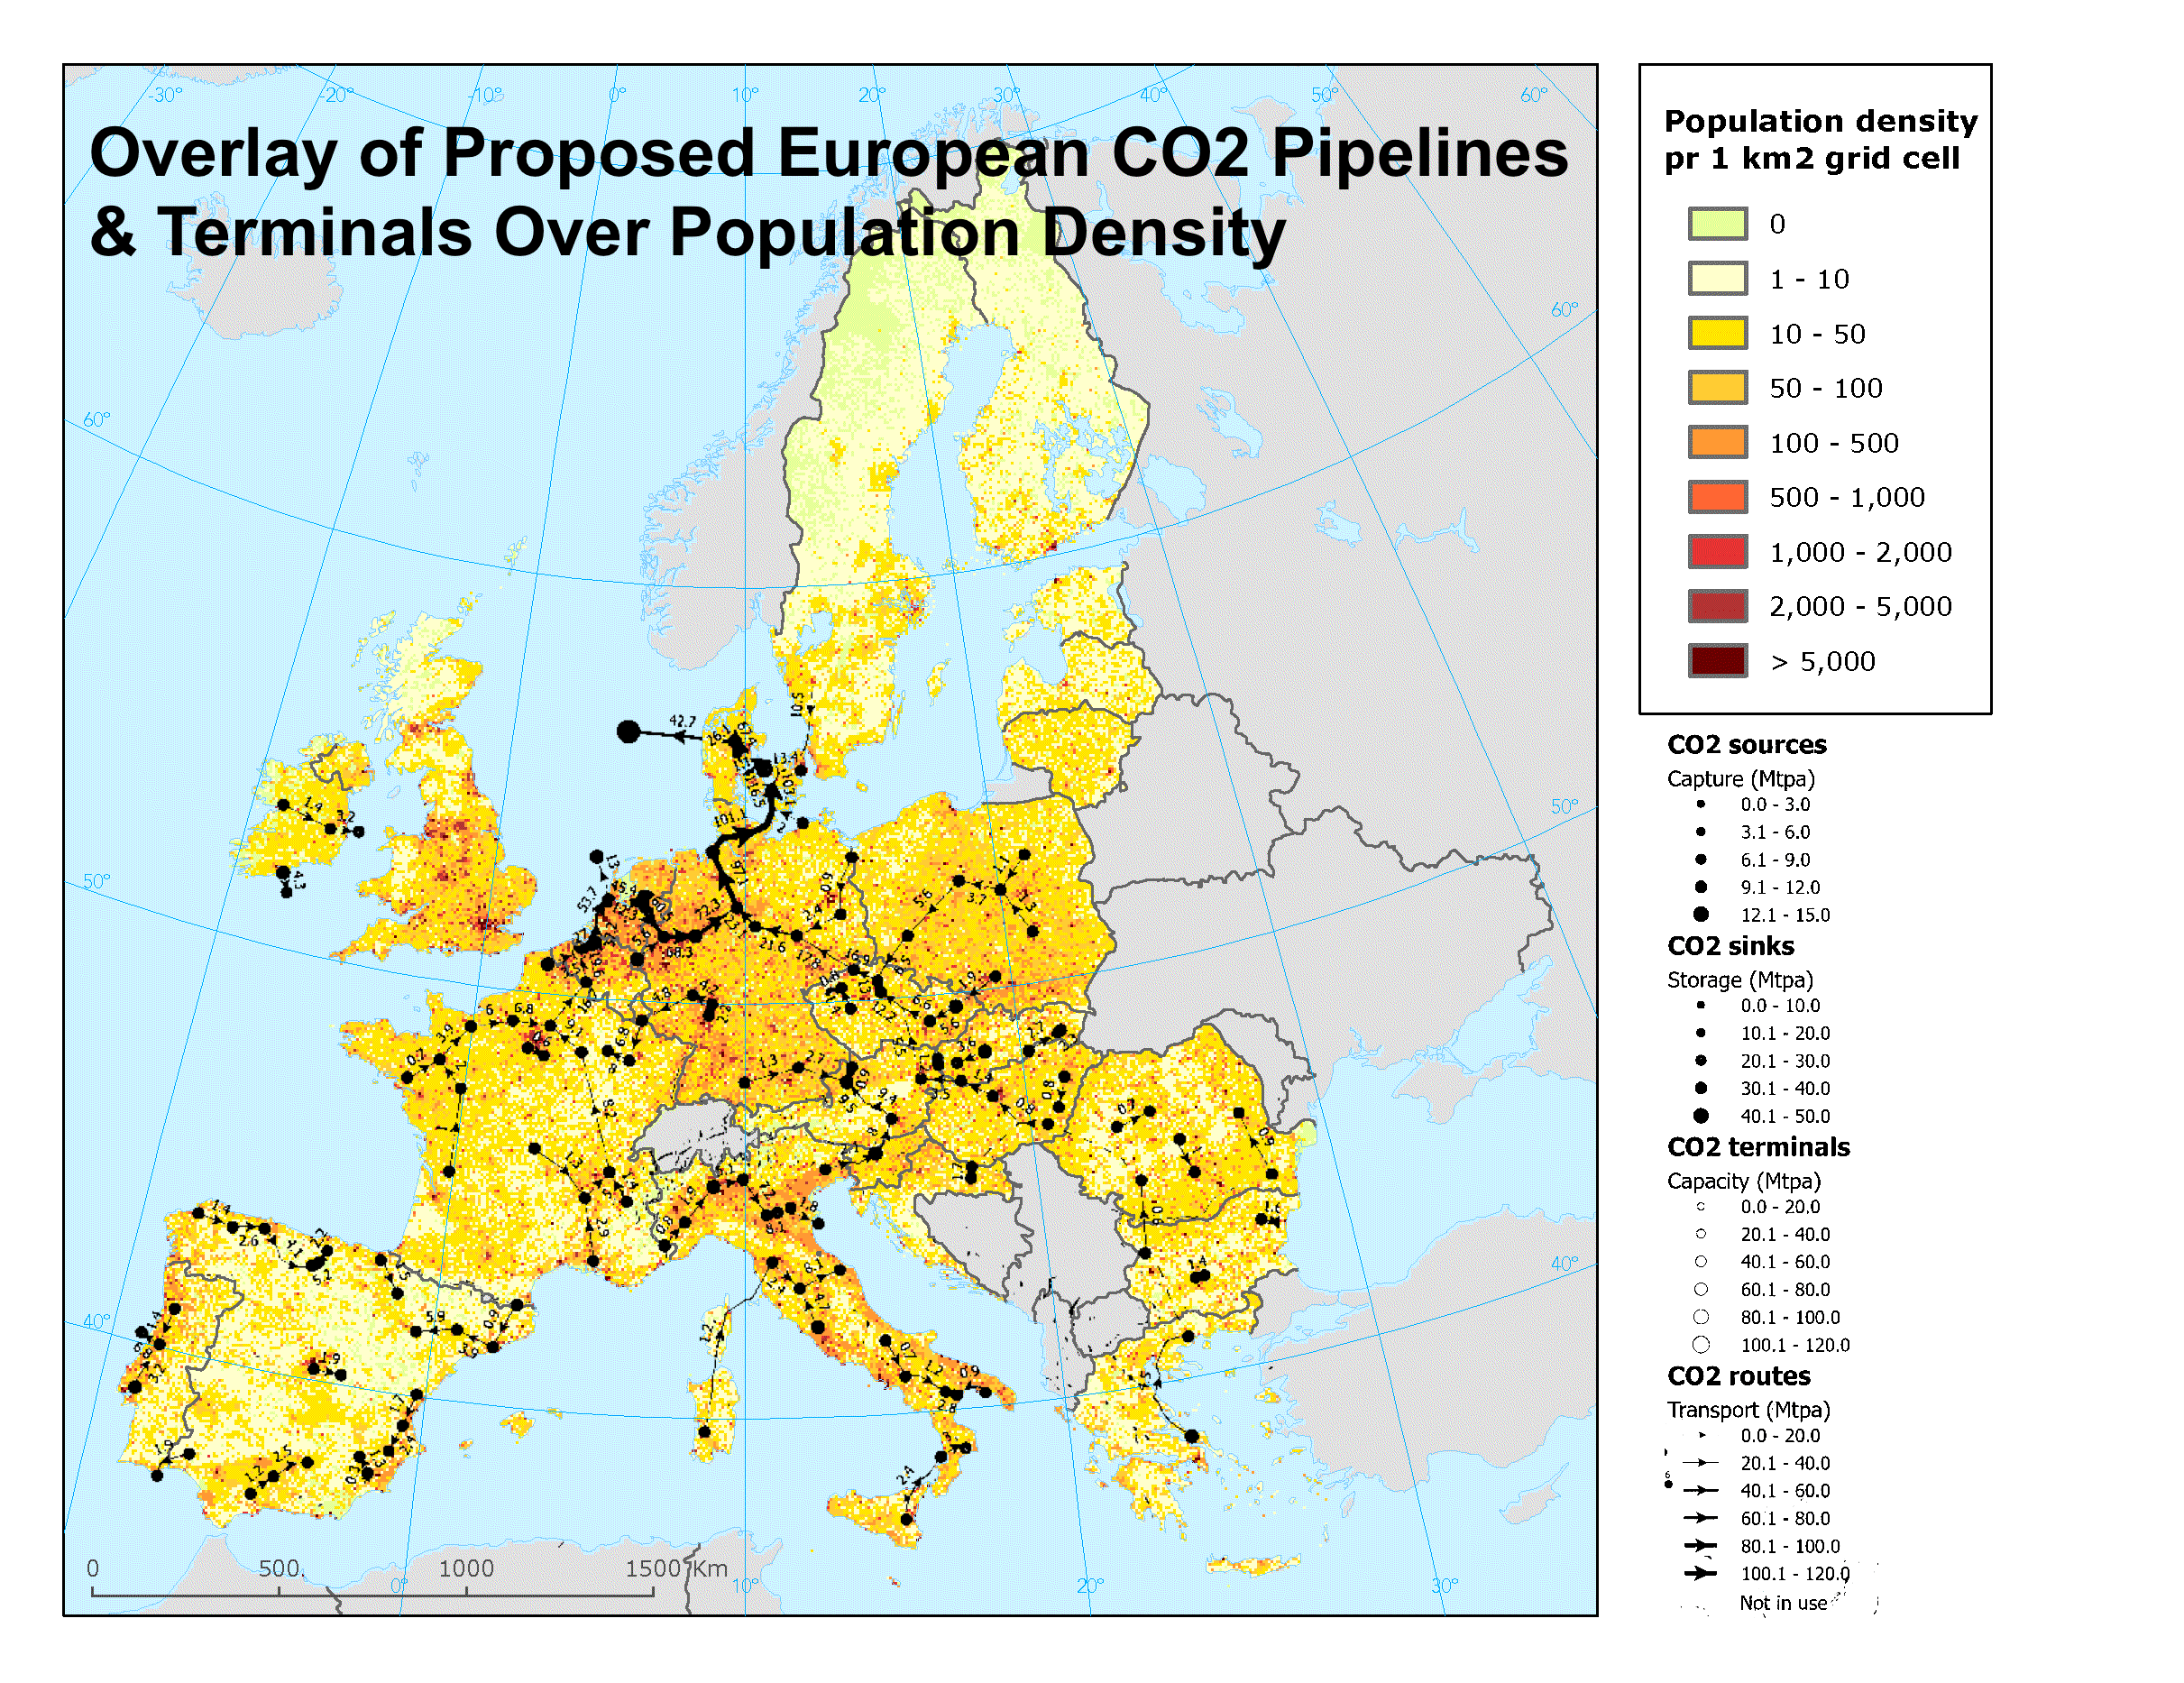 Overlay of proposed European CO2 pipelines and terminals on top of a map of European population density by author